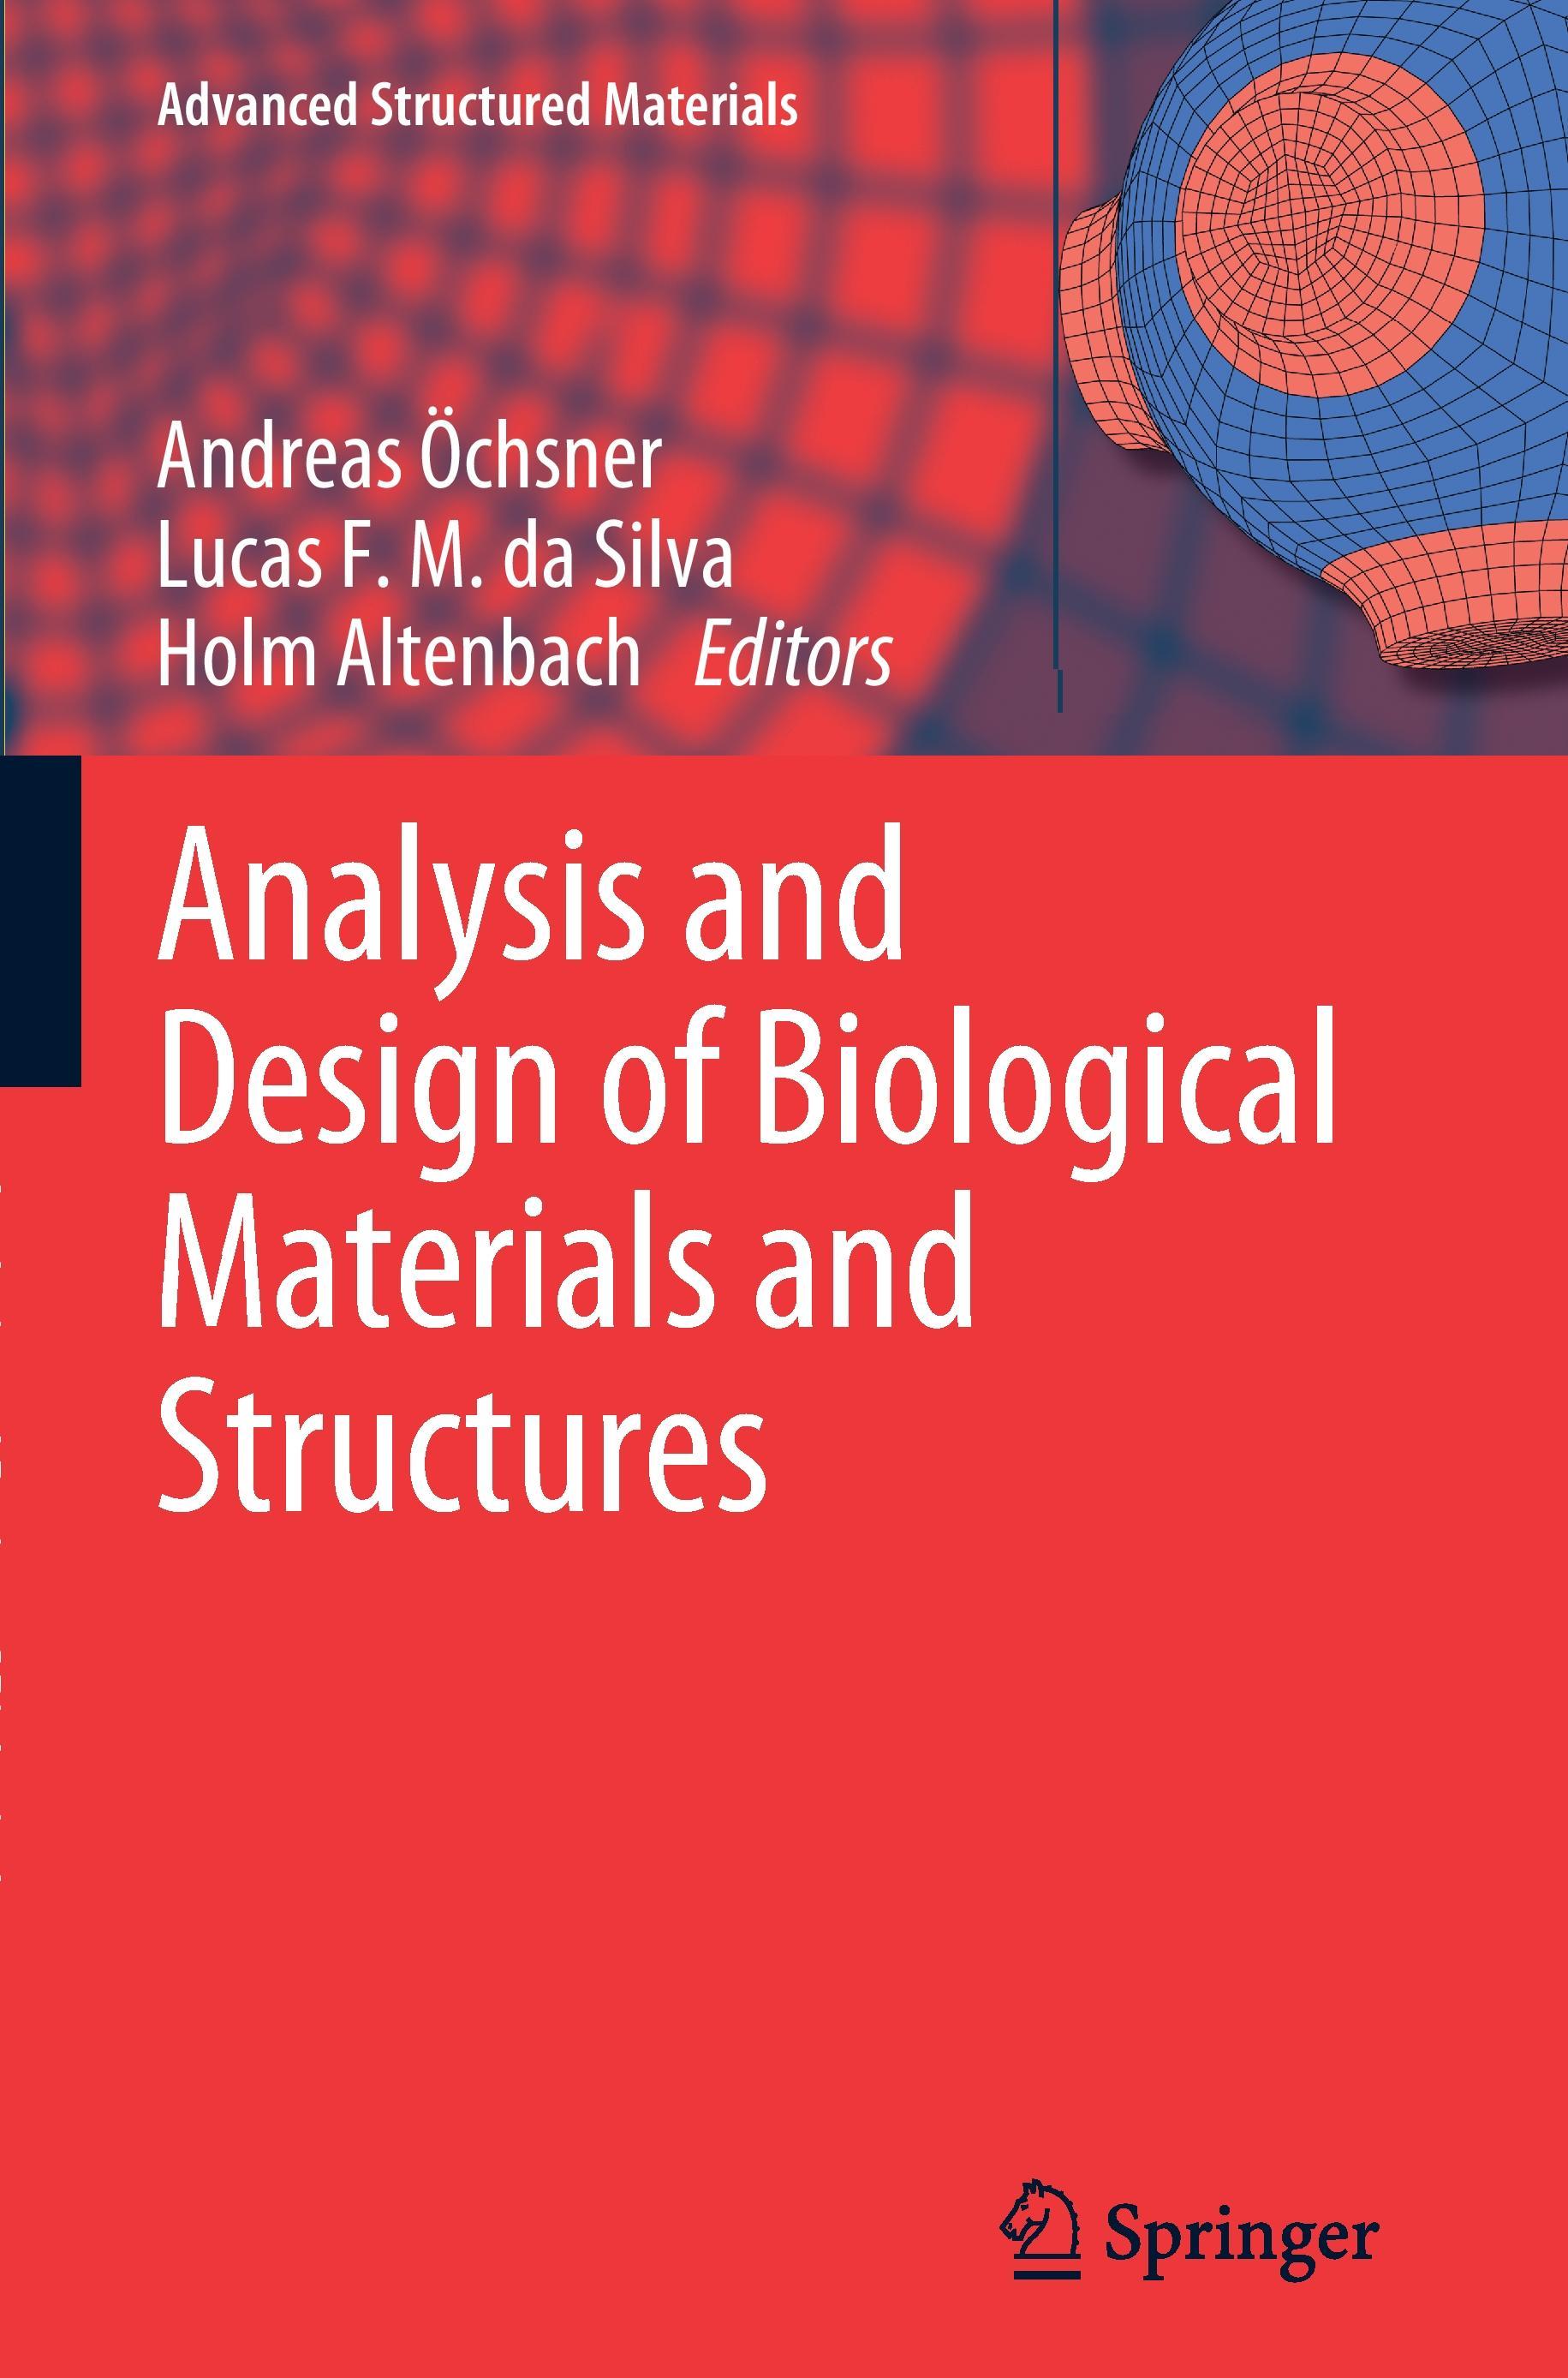 Analysis and Design of Biological Materials and Structures - Oechsner, Andreas|Silva, Lucas F. M. da|Altenbach, Holm